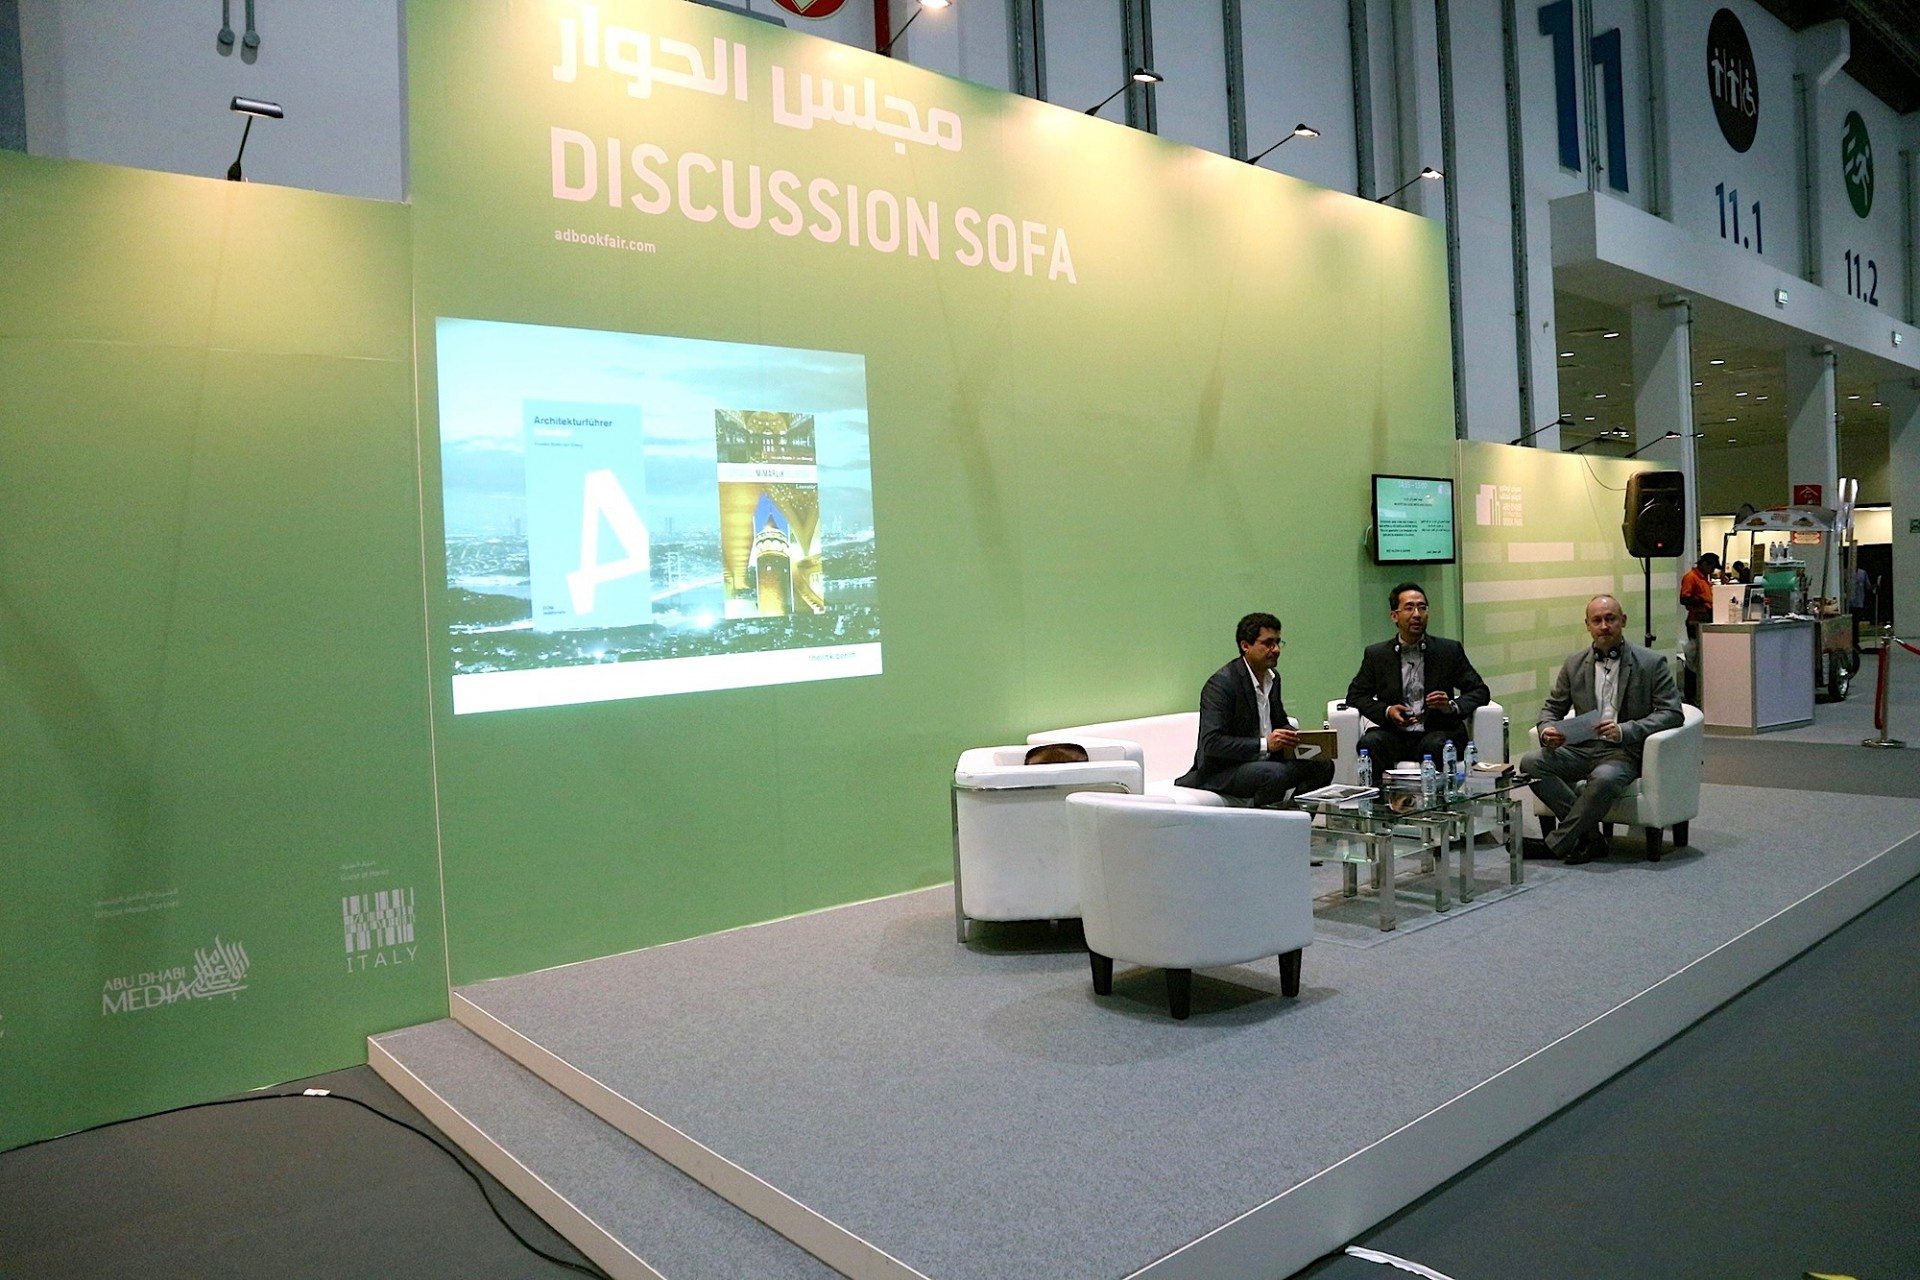 Presentation and publication. At the Discussion Sofa of the ADIBF with host Mustafa Al-Slaiman presenting the Architectural Guide United Arab Emirates with Jan Dimog and Hendrik Bohle.